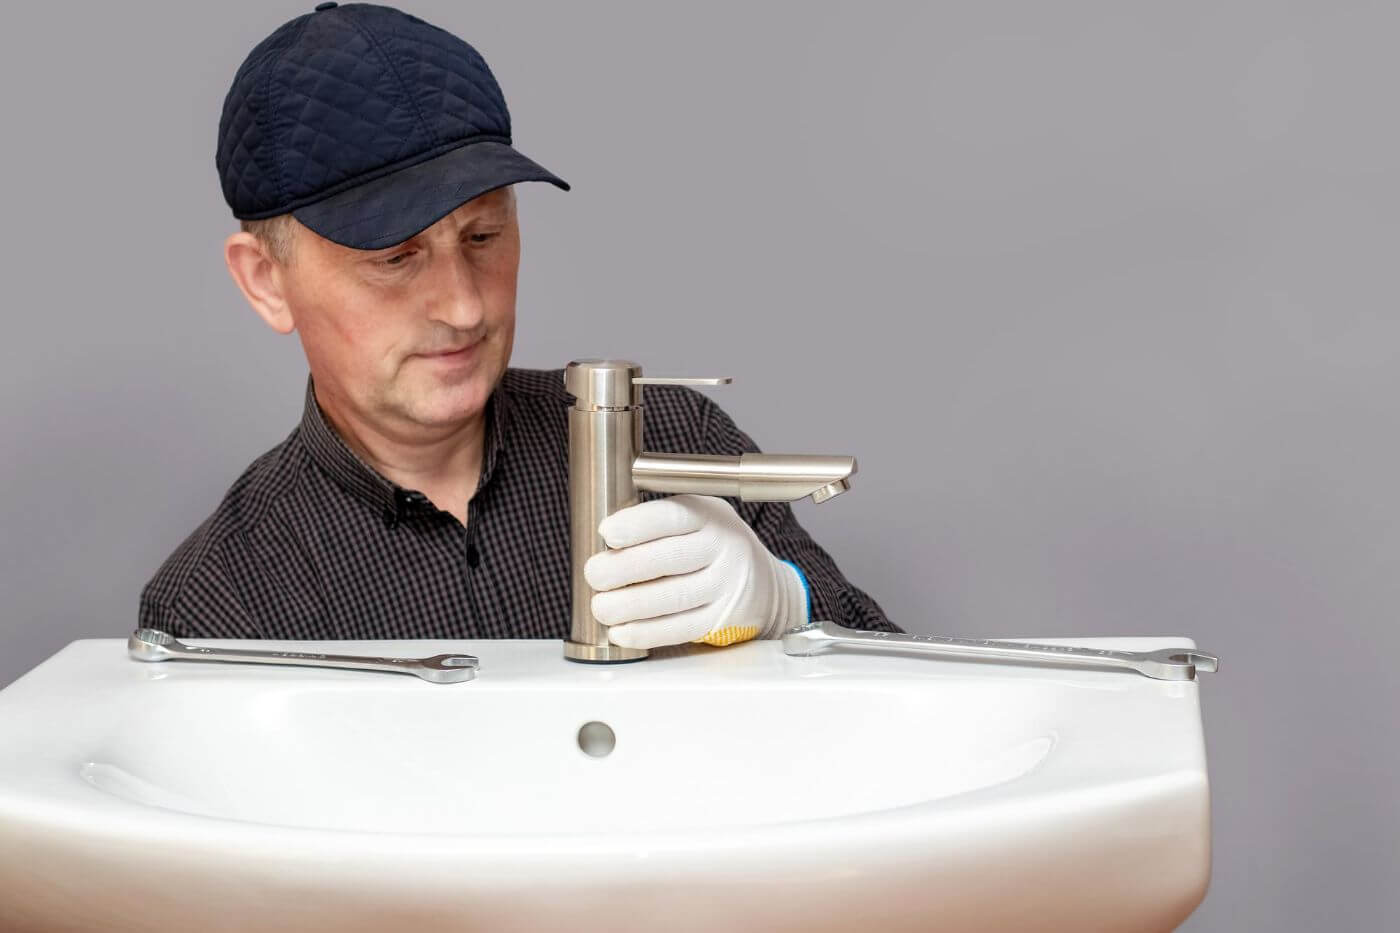 8 Important Plumbing Marketing KPIs You Should Be Tracking in Your Business